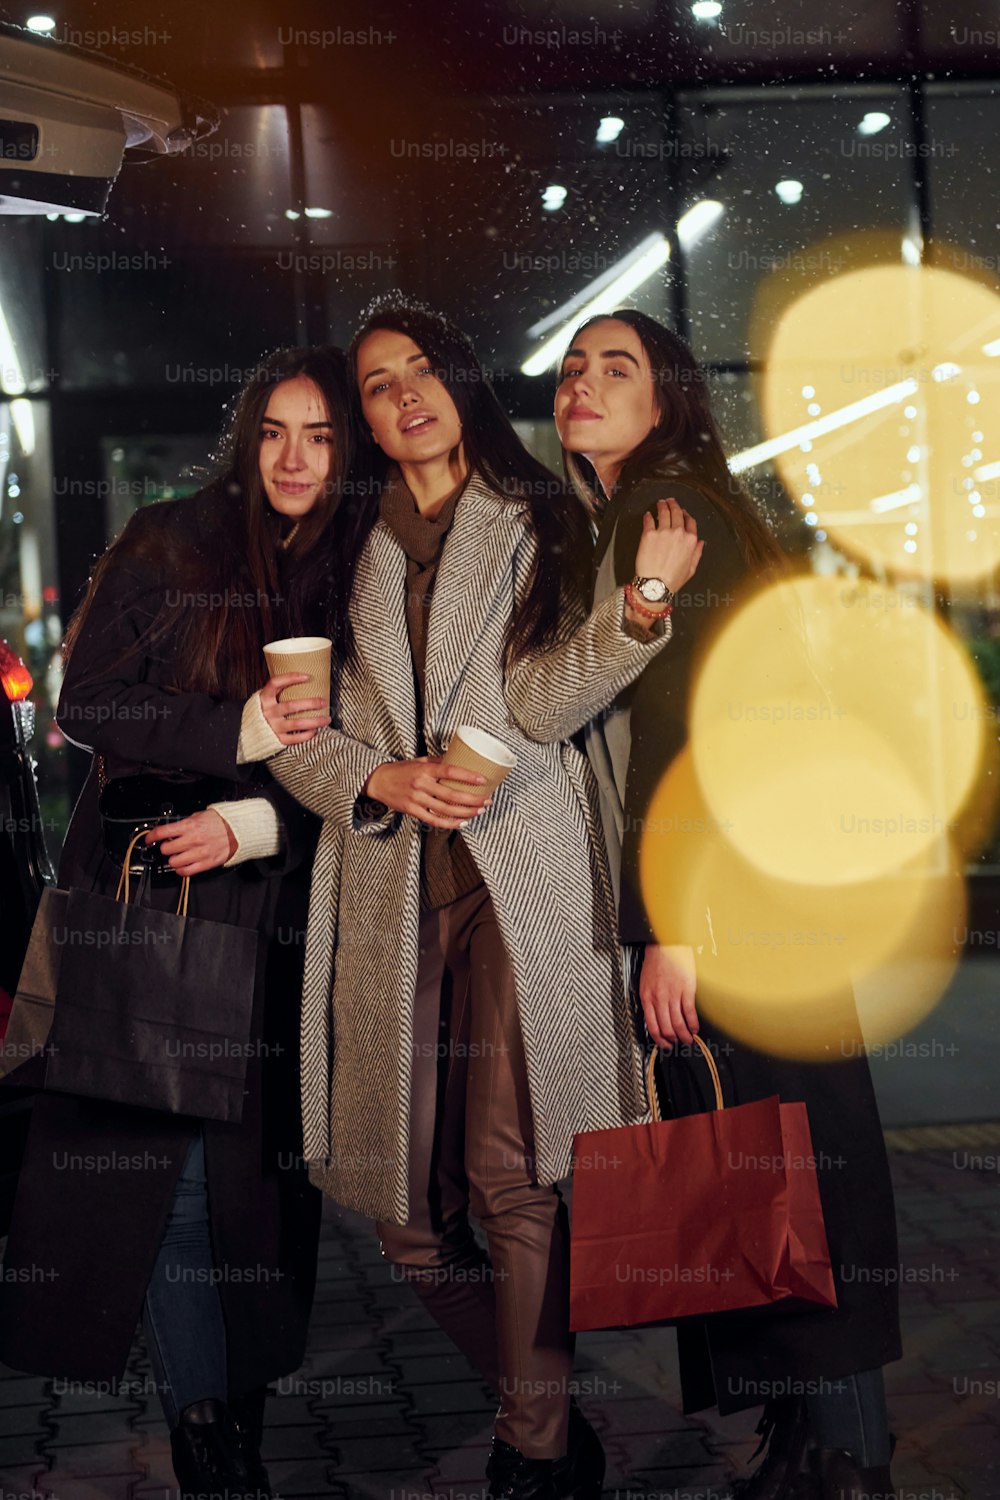 Cups of drink in hands. Three cheerful women spends Christmas holidays together outdoors. Conception of new year.